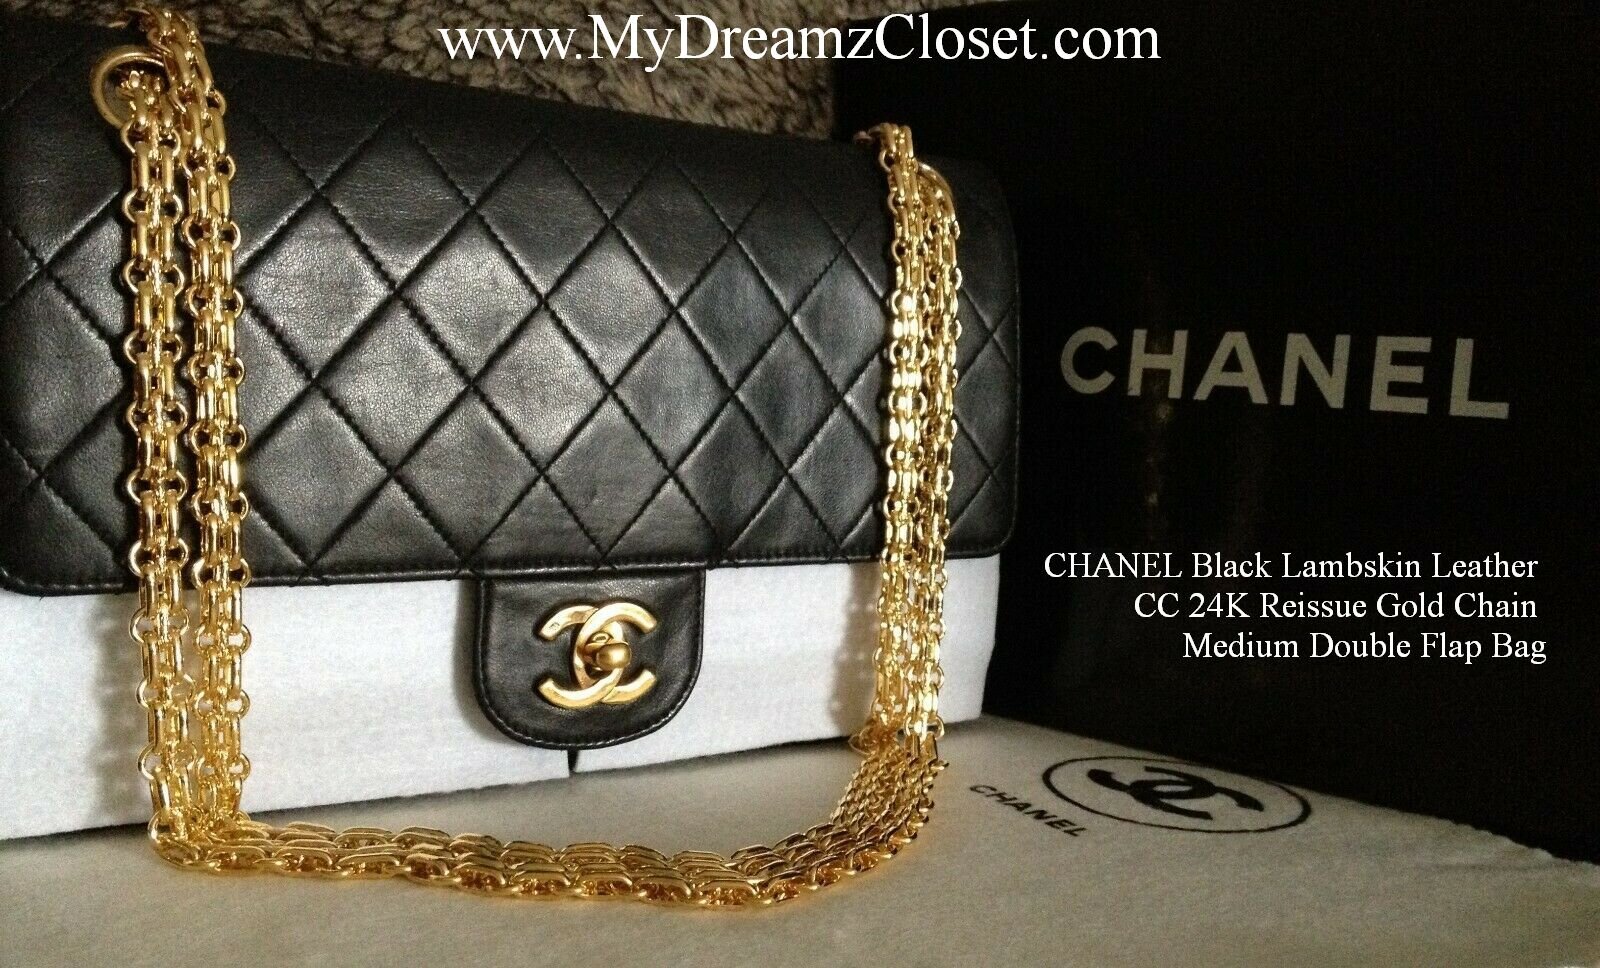 CHANEL 2.55 Leather Bags & Handbags for Women, Authenticity Guaranteed